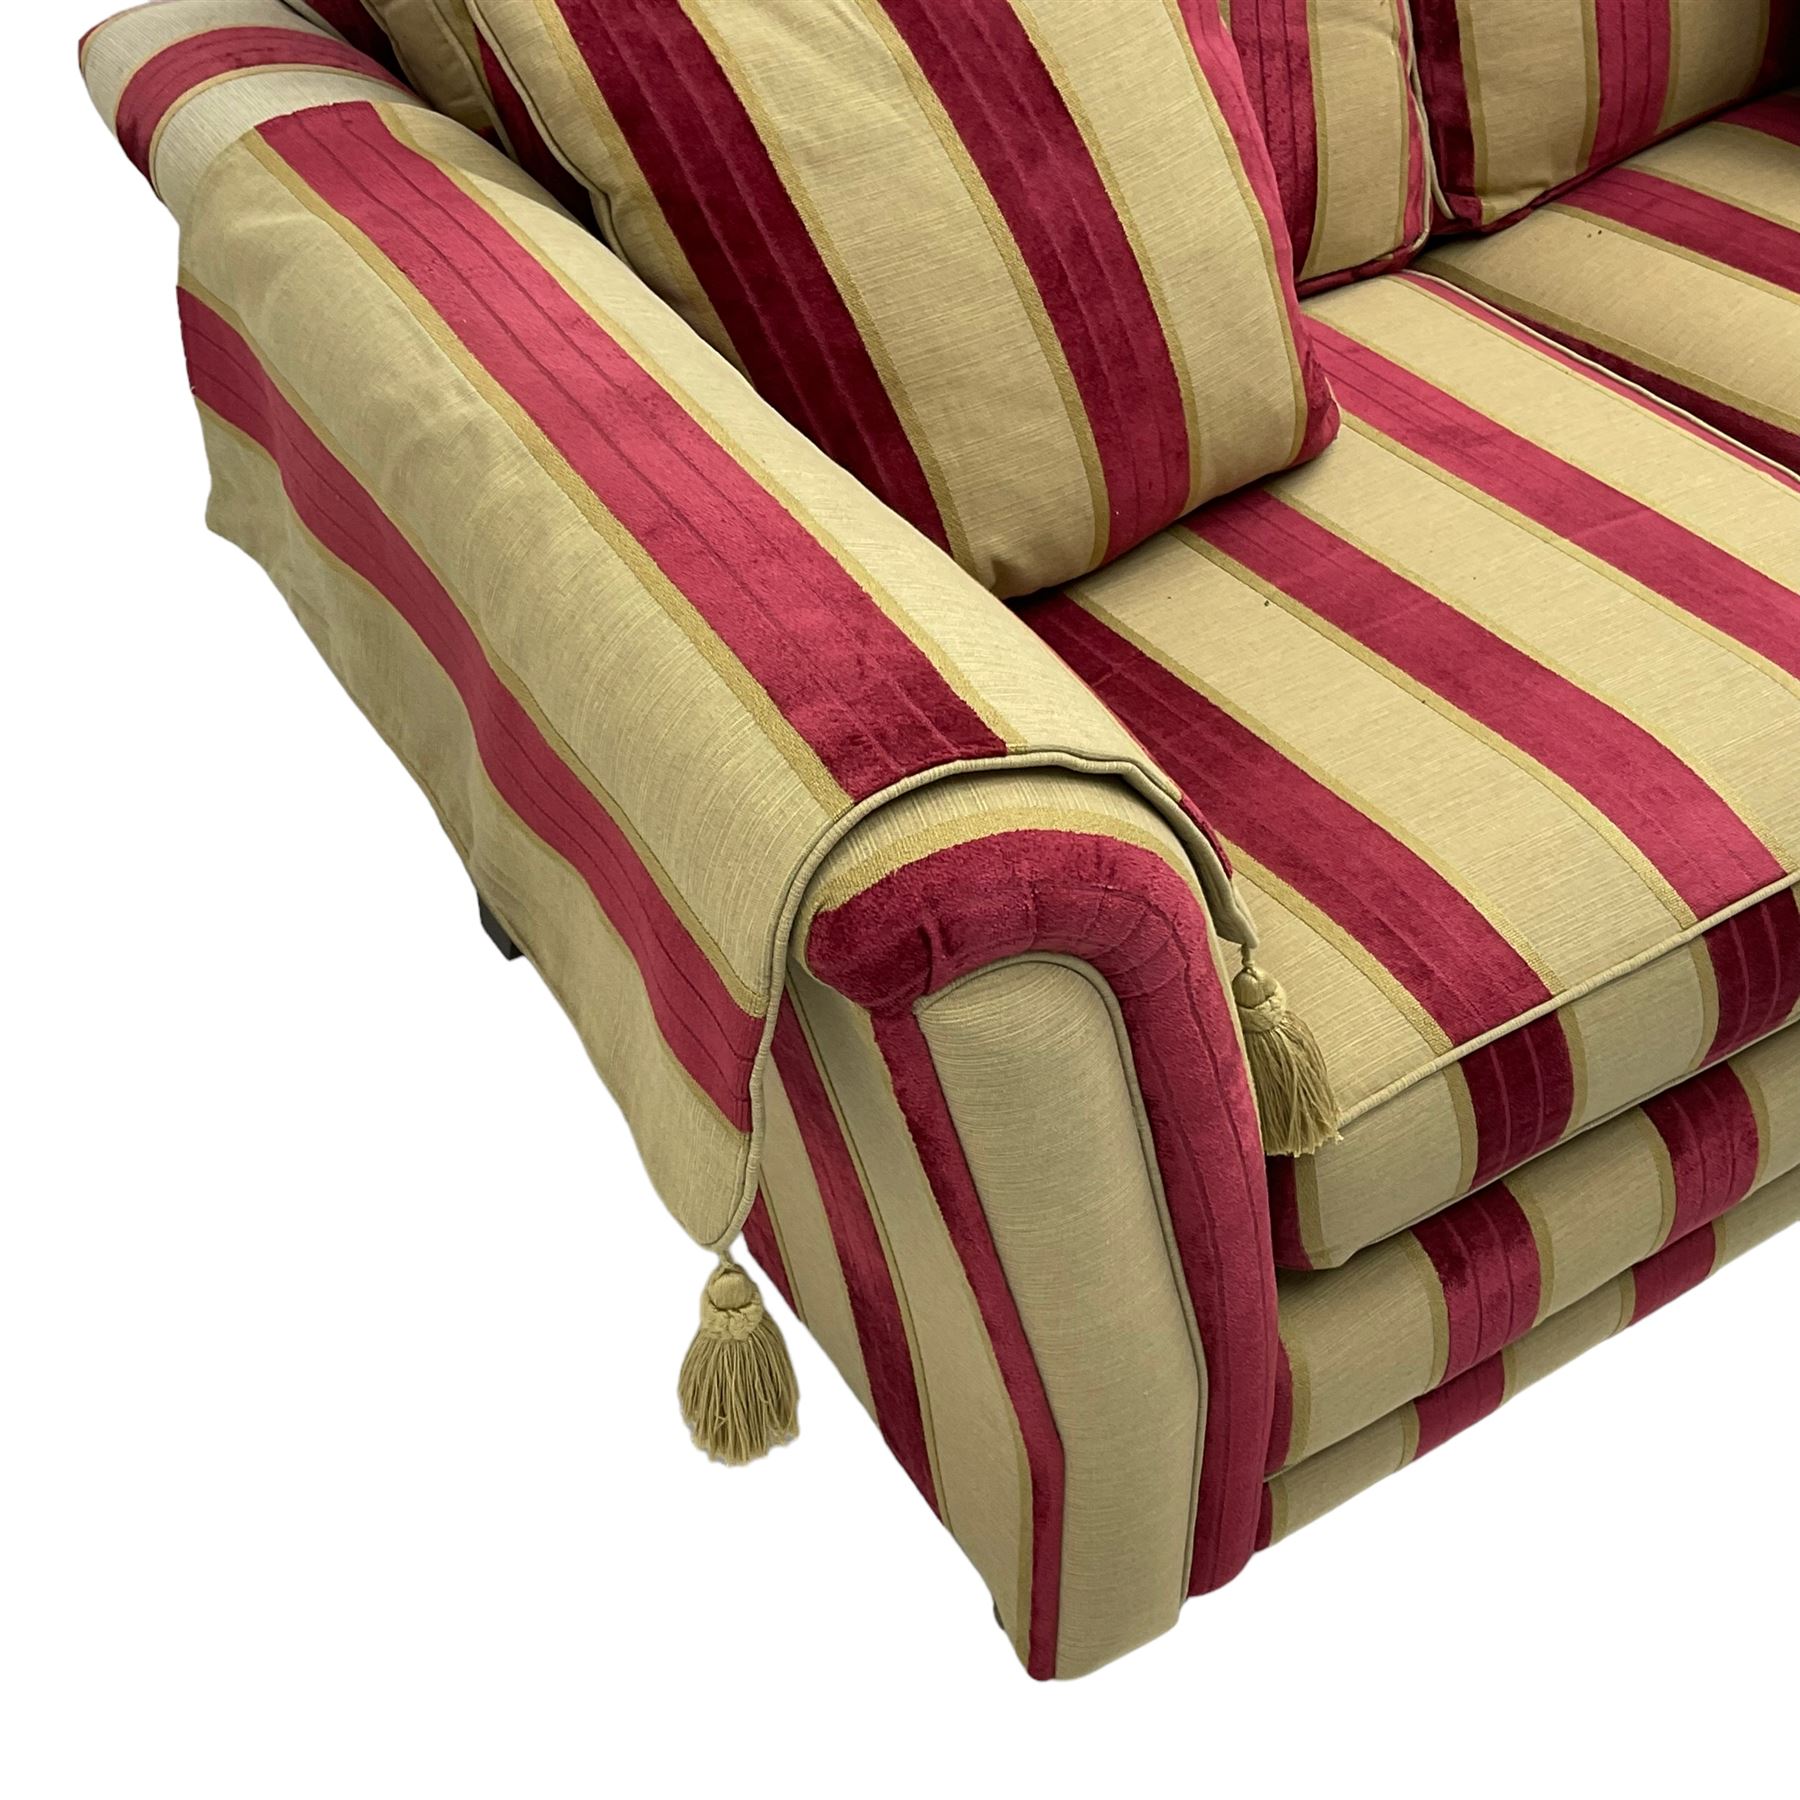 Three-piece lounge suite - large two-seat sofa upholstered in red and gold striped fabric (W185cm - Image 20 of 24